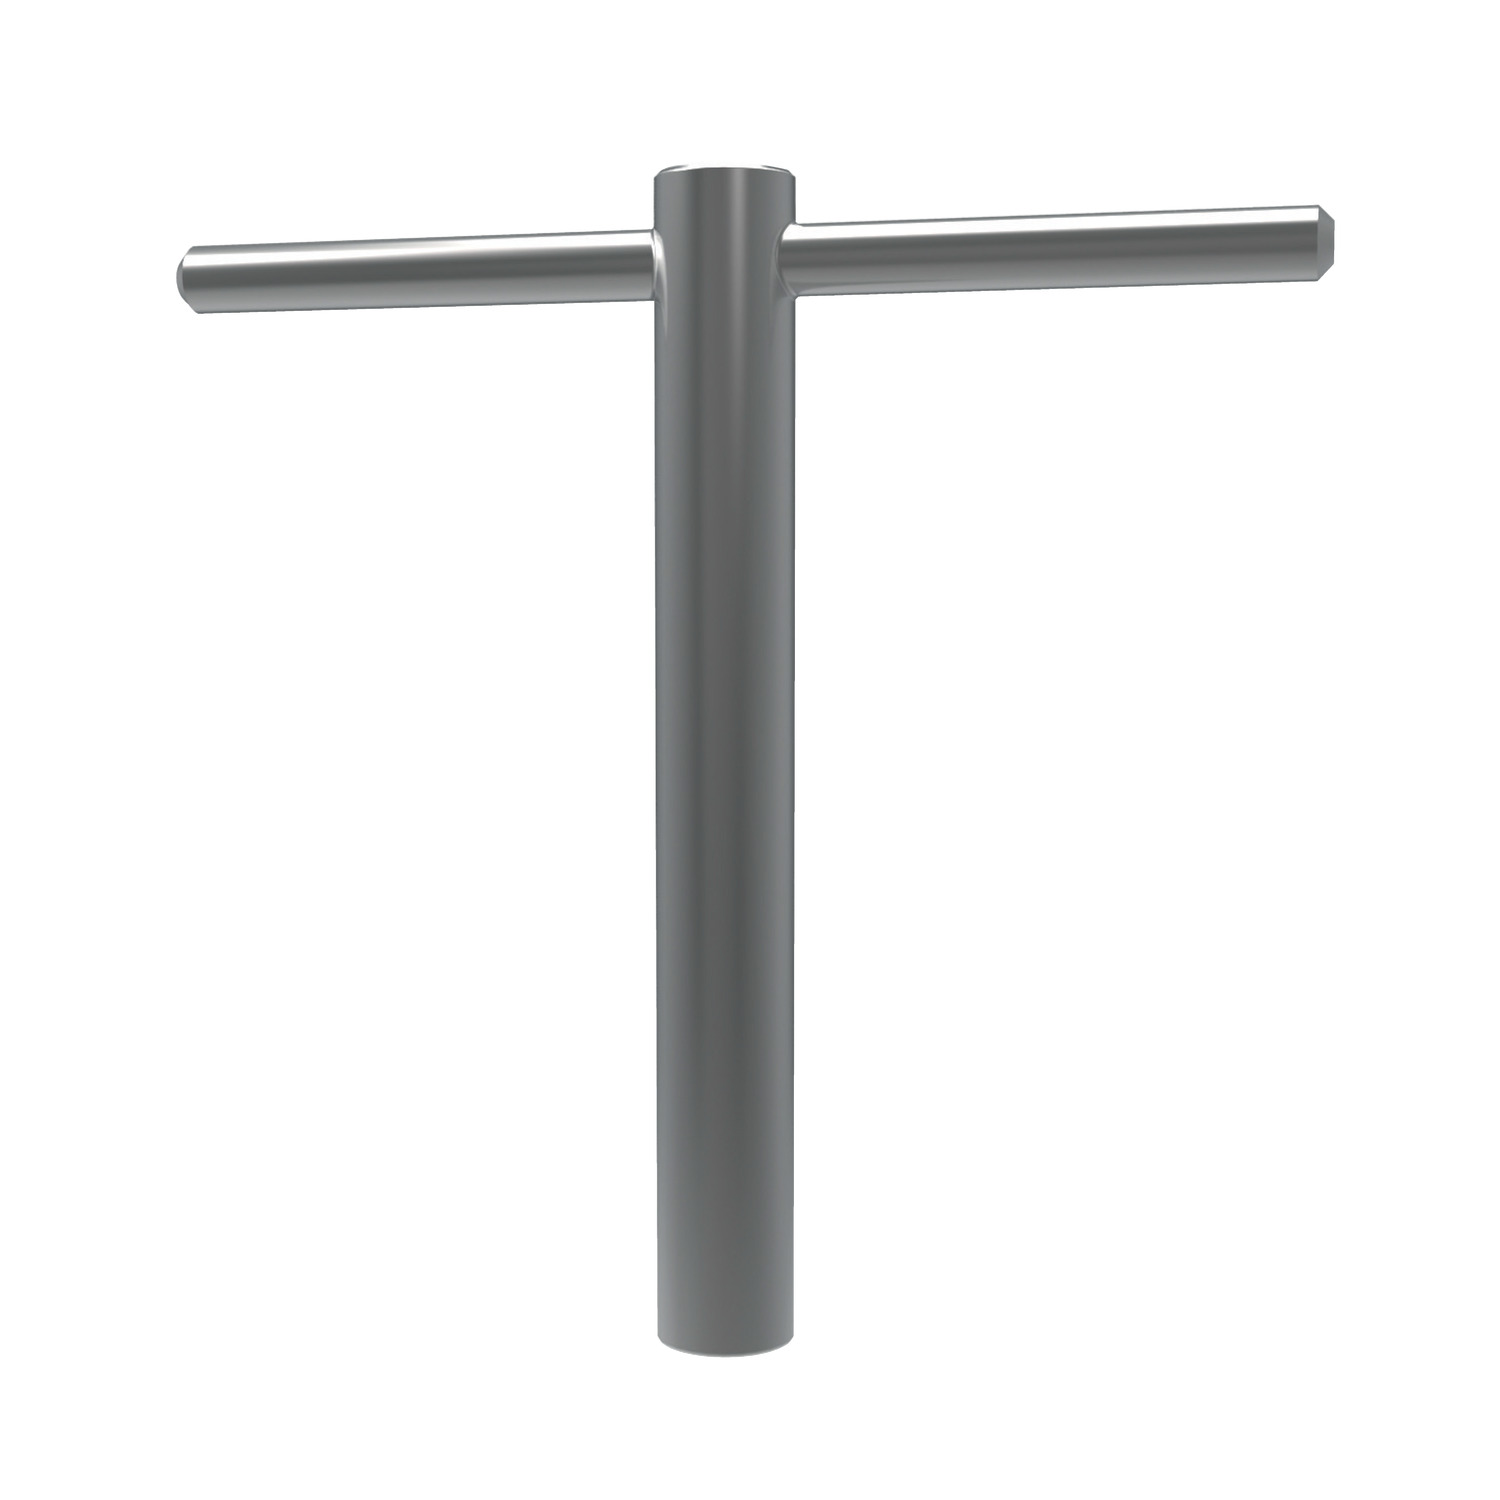 92010.W0005 T-Wrench, Square Drive (Long) - Steel. 5 - 12 - 6,0 - 120